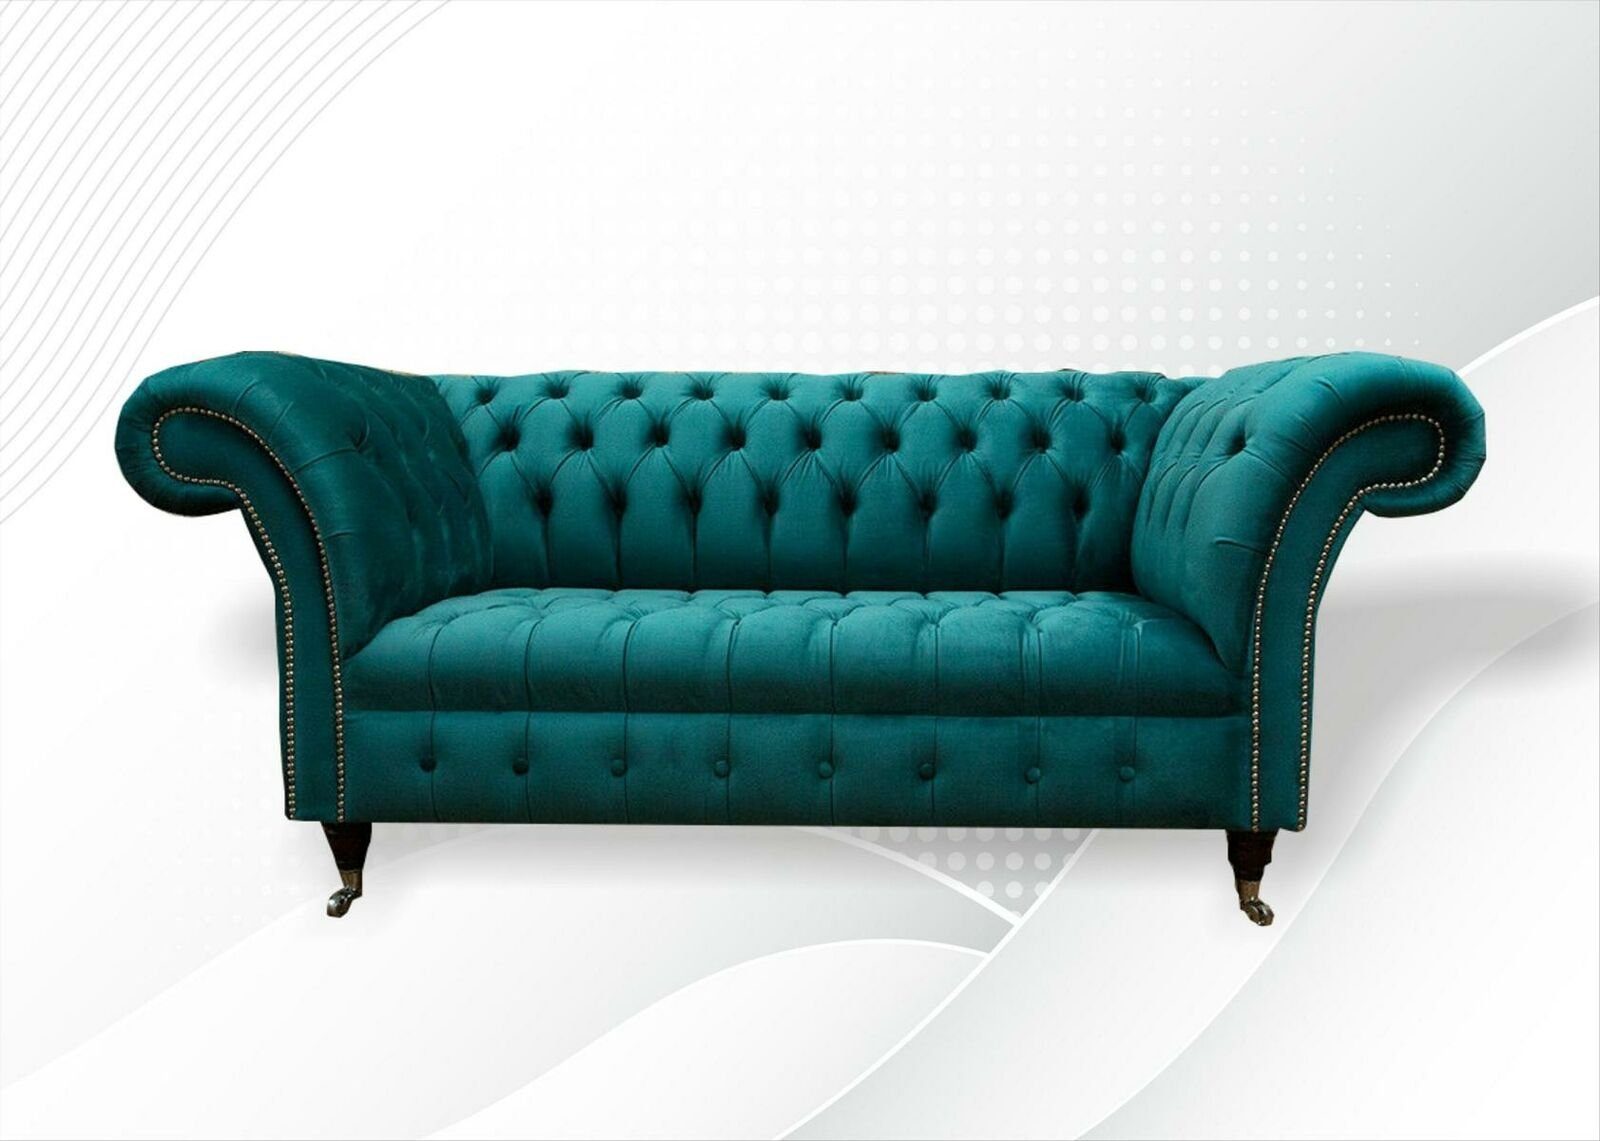 JVmoebel Chesterfield-Sofa, Sofa 2 Sitzer Chesterfield Polster Design Luxus Couch Sofas Lounge